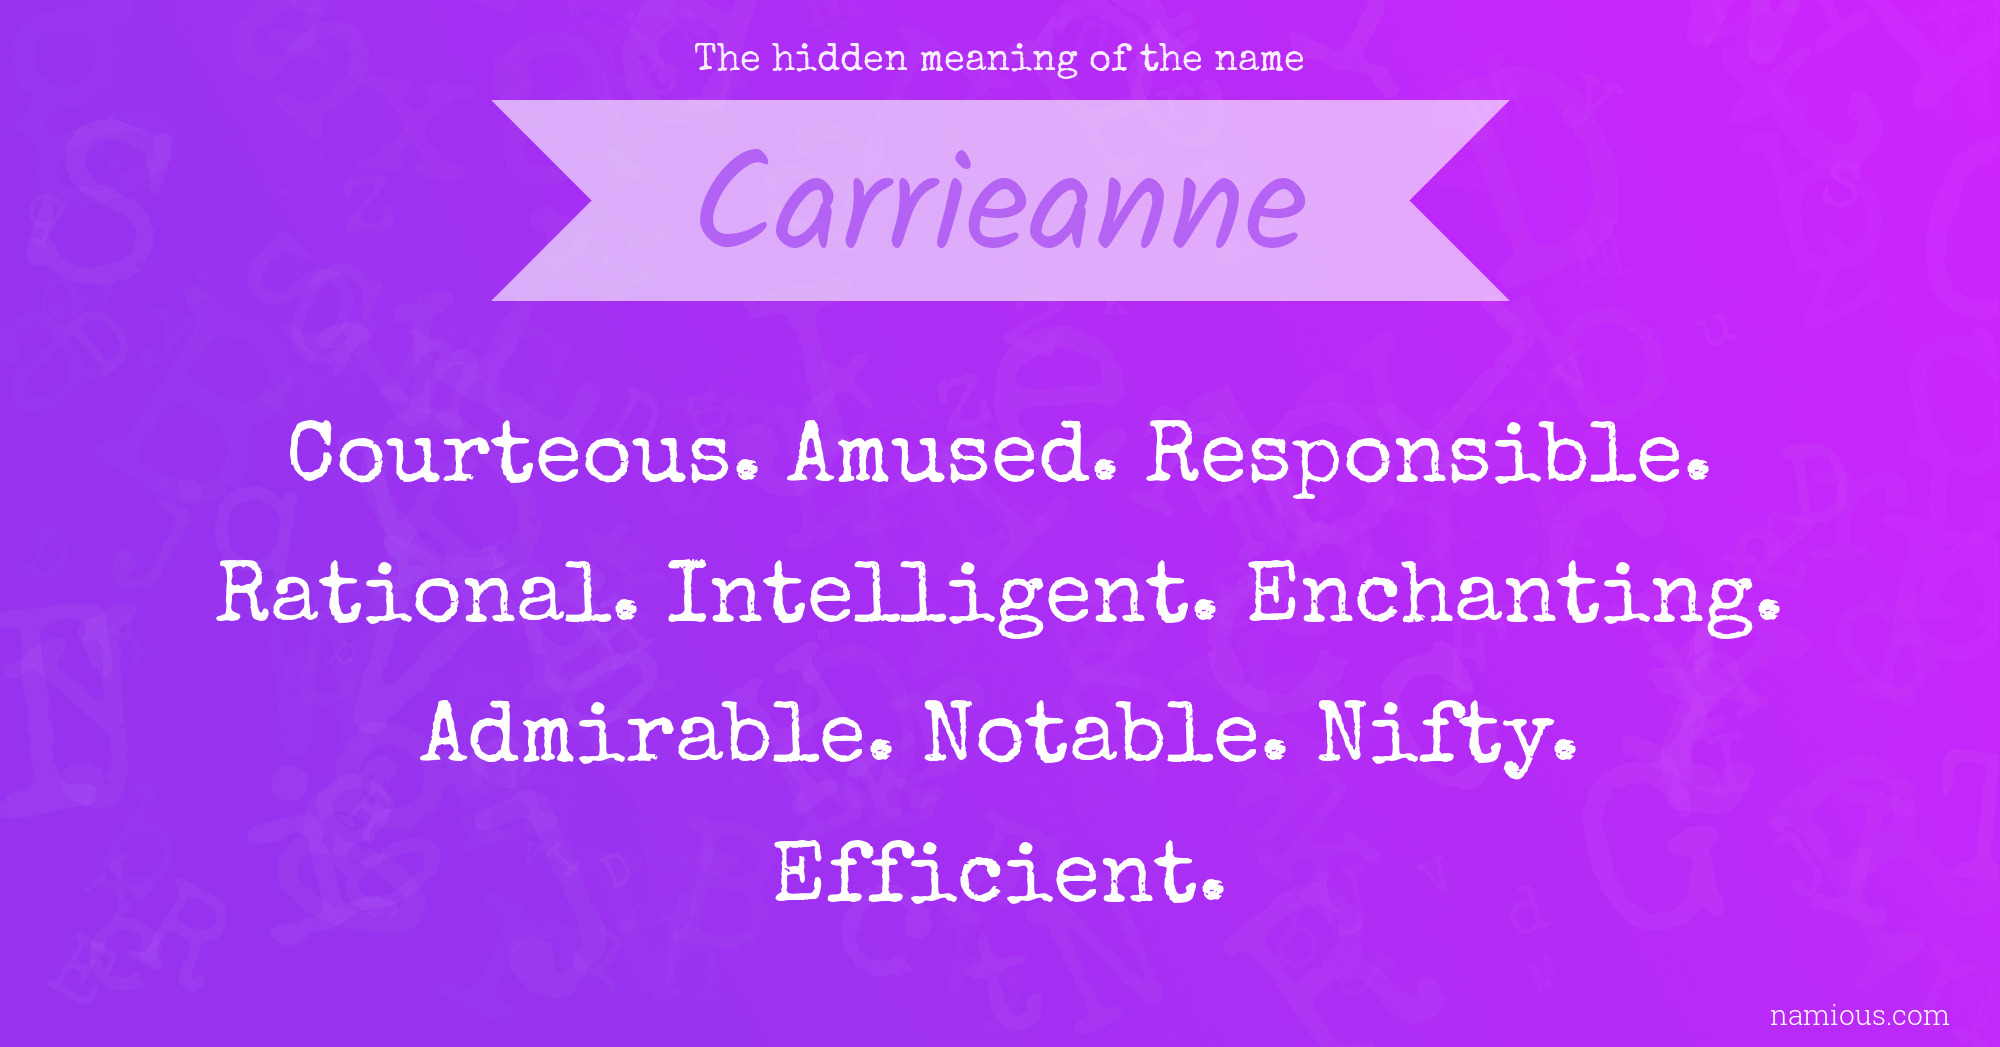 The hidden meaning of the name Carrieanne